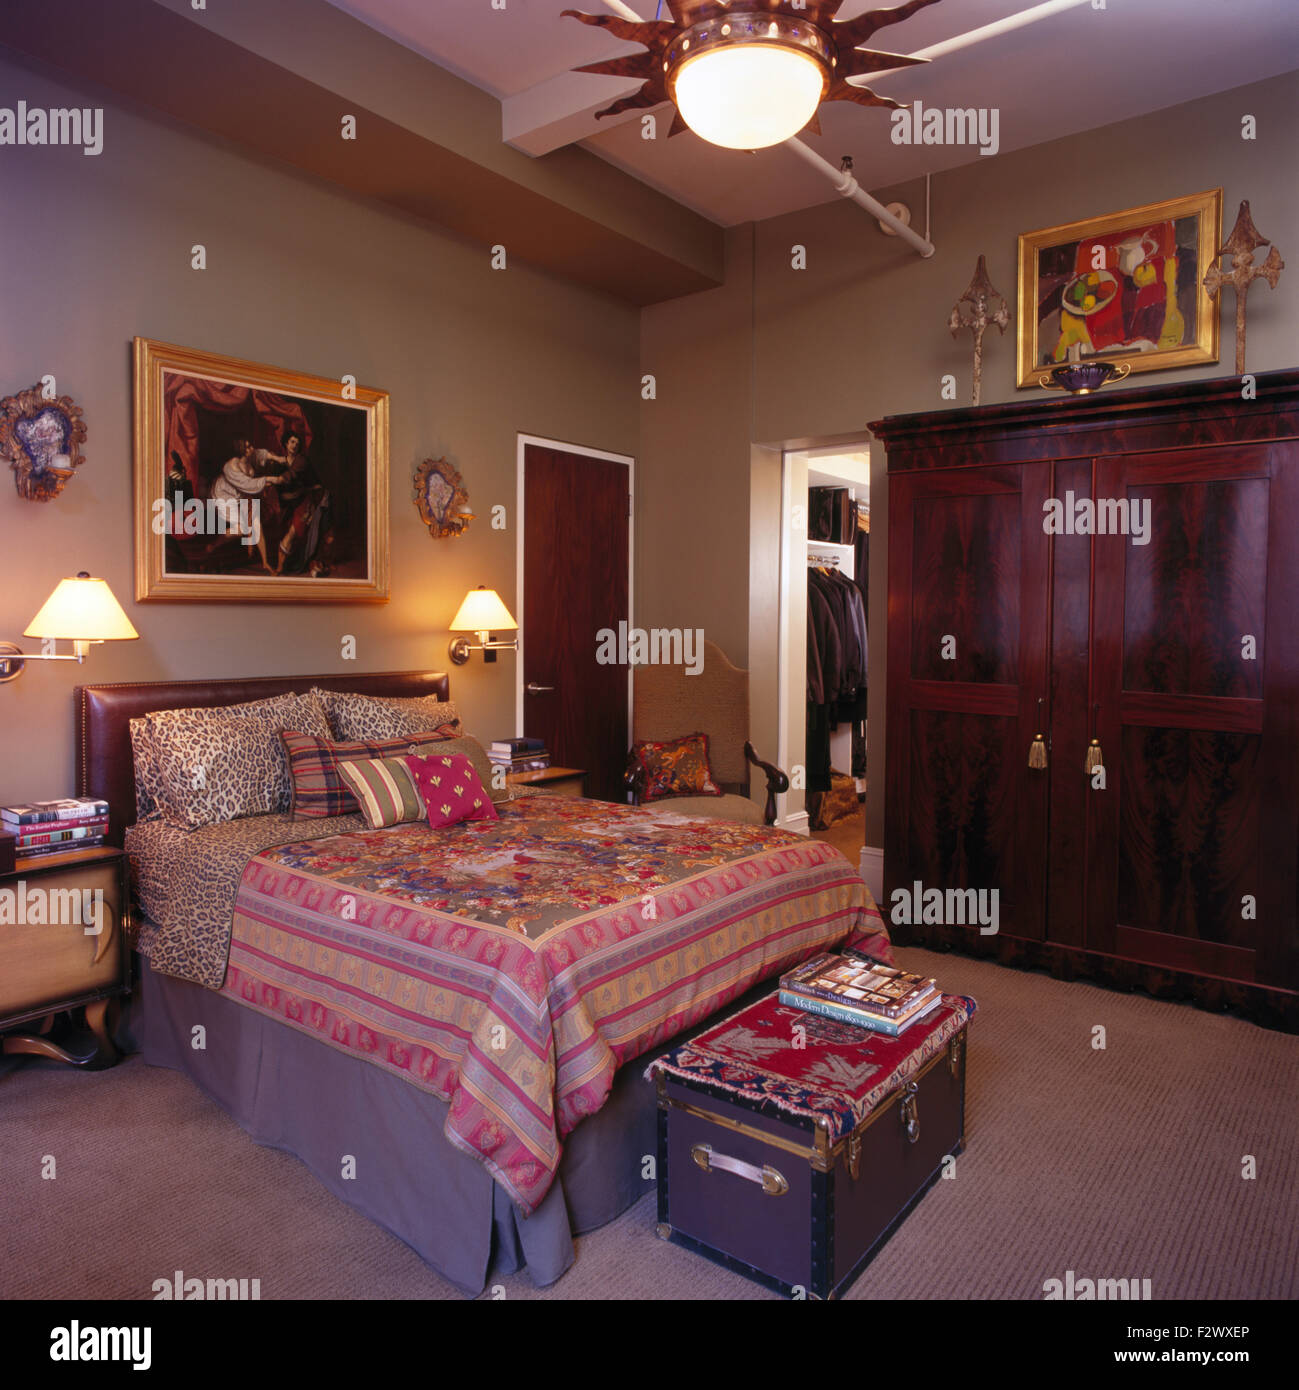 Leopard-print linen and an Indian bedspread on bed in brown nineties bedroom with a mahogany wardrobe Stock Photo